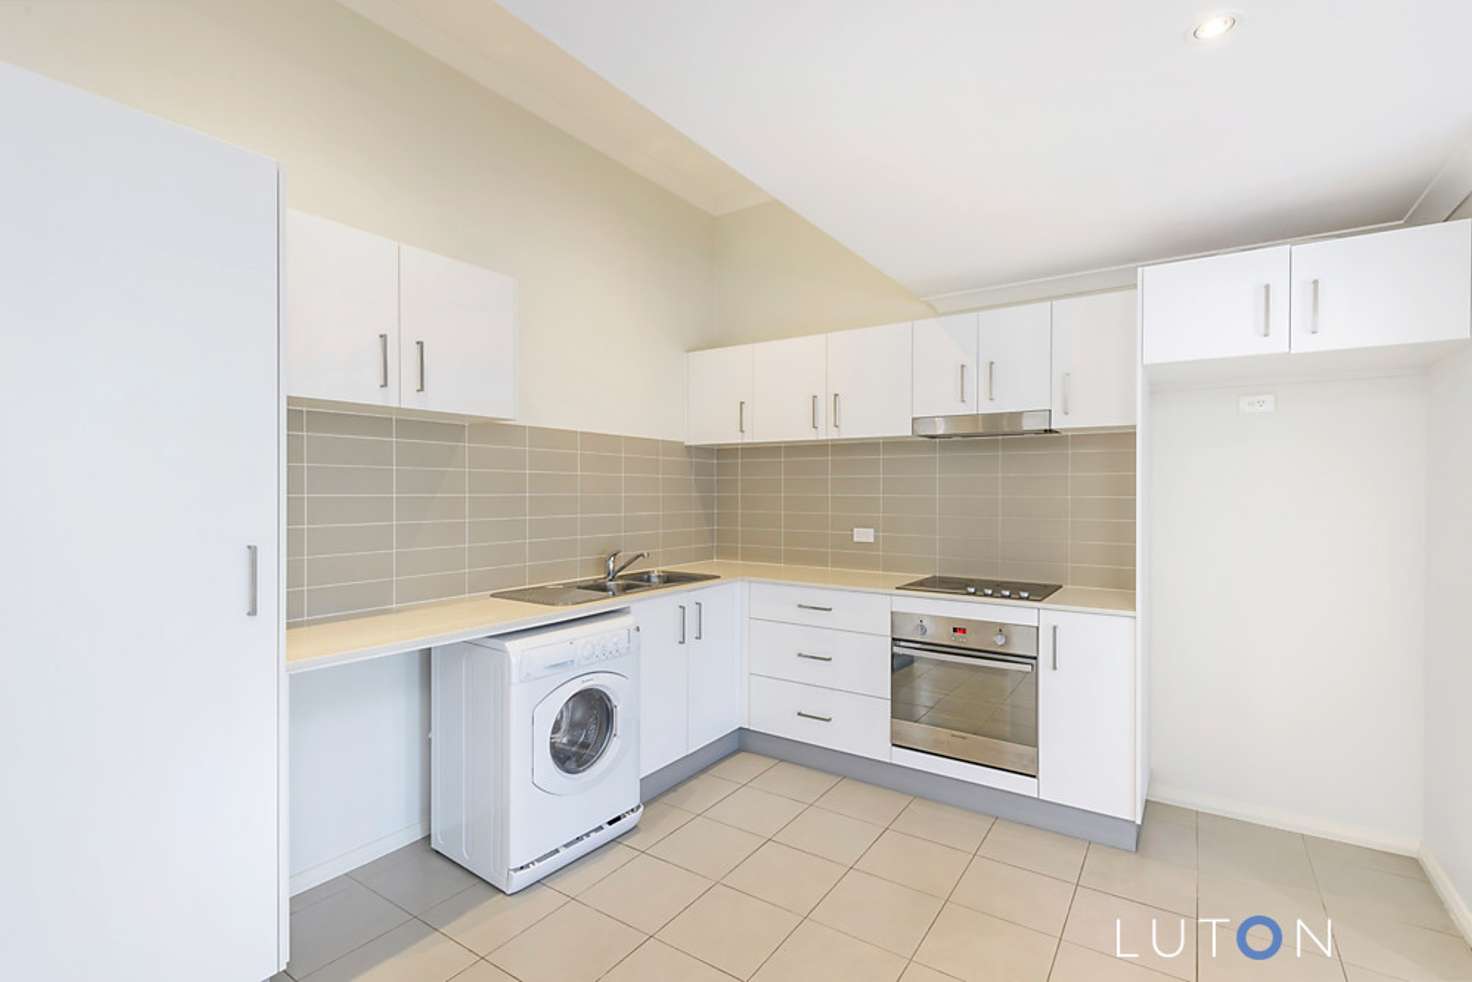 Main view of Homely unit listing, 31 Carver Lane, Gungahlin ACT 2912